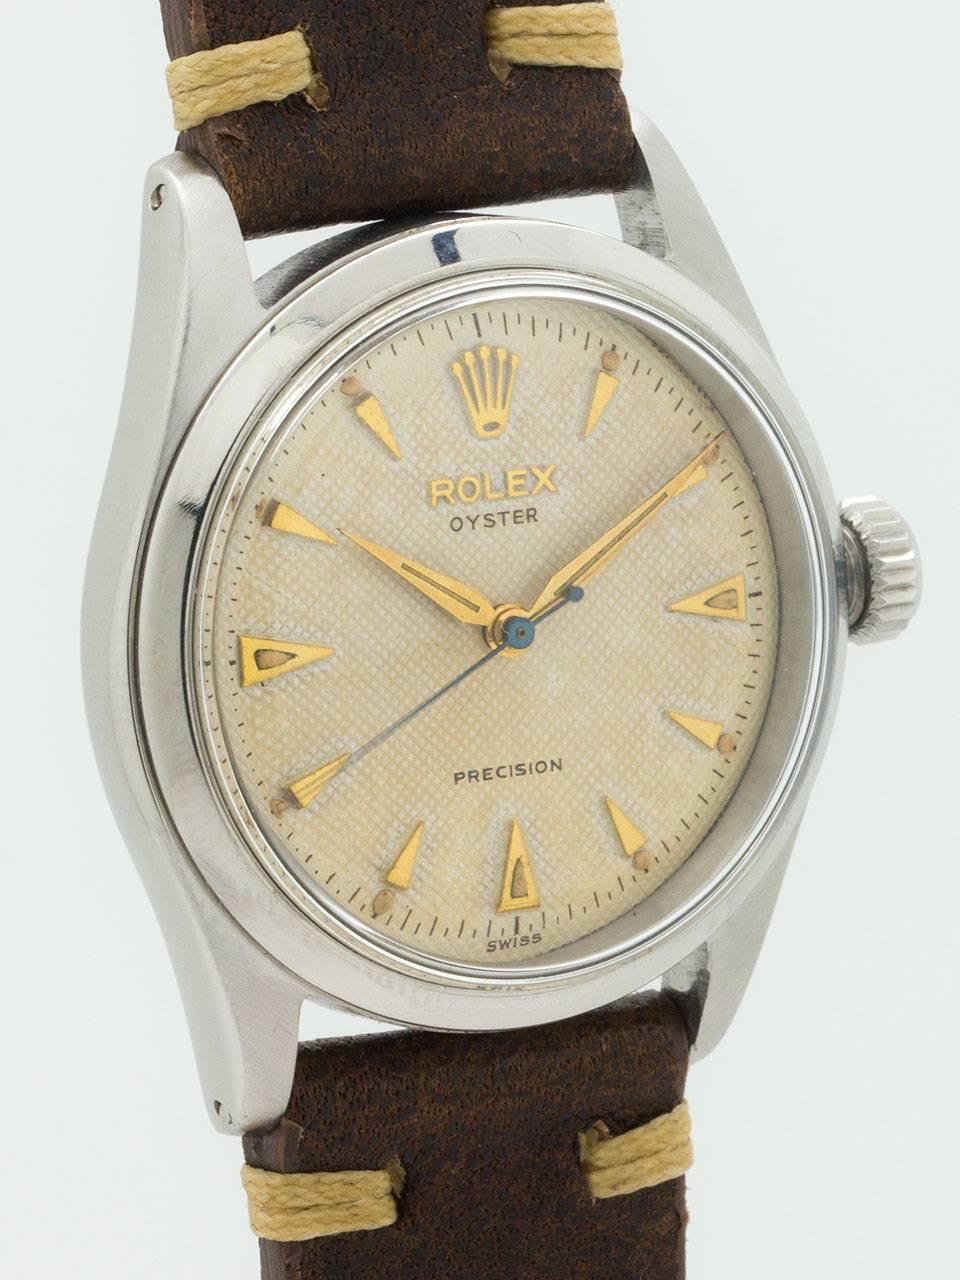 Vintage Rolex Oyster Precision ref 6282 circa 1955 with beautiful condition original waffle dial. Featuring 34mm diameter stainless steel Oyster case with smooth bezel and acrylic crystal. The dial on this watch is very desirable example and is in